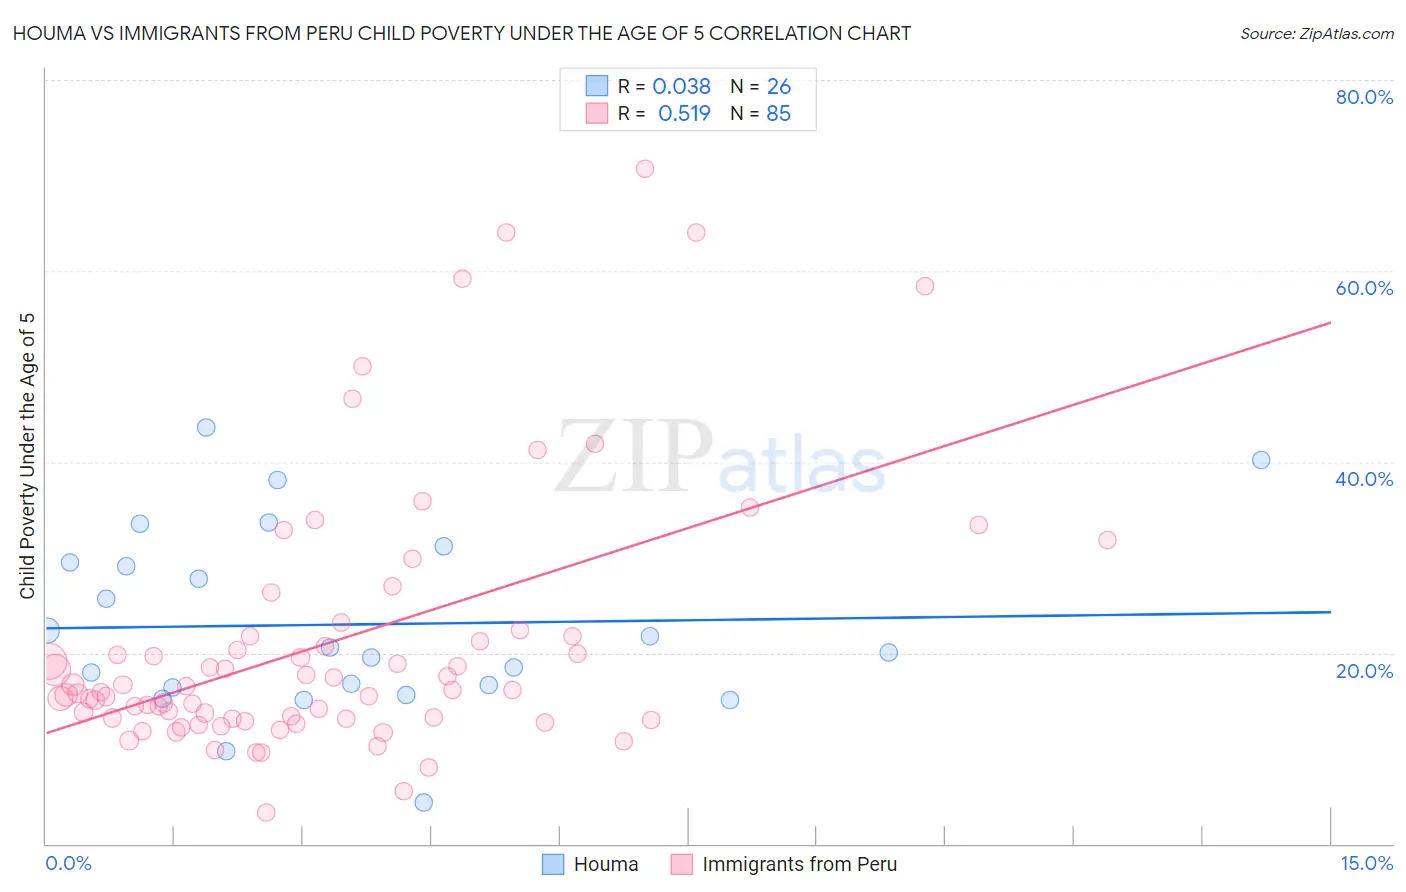 Houma vs Immigrants from Peru Child Poverty Under the Age of 5